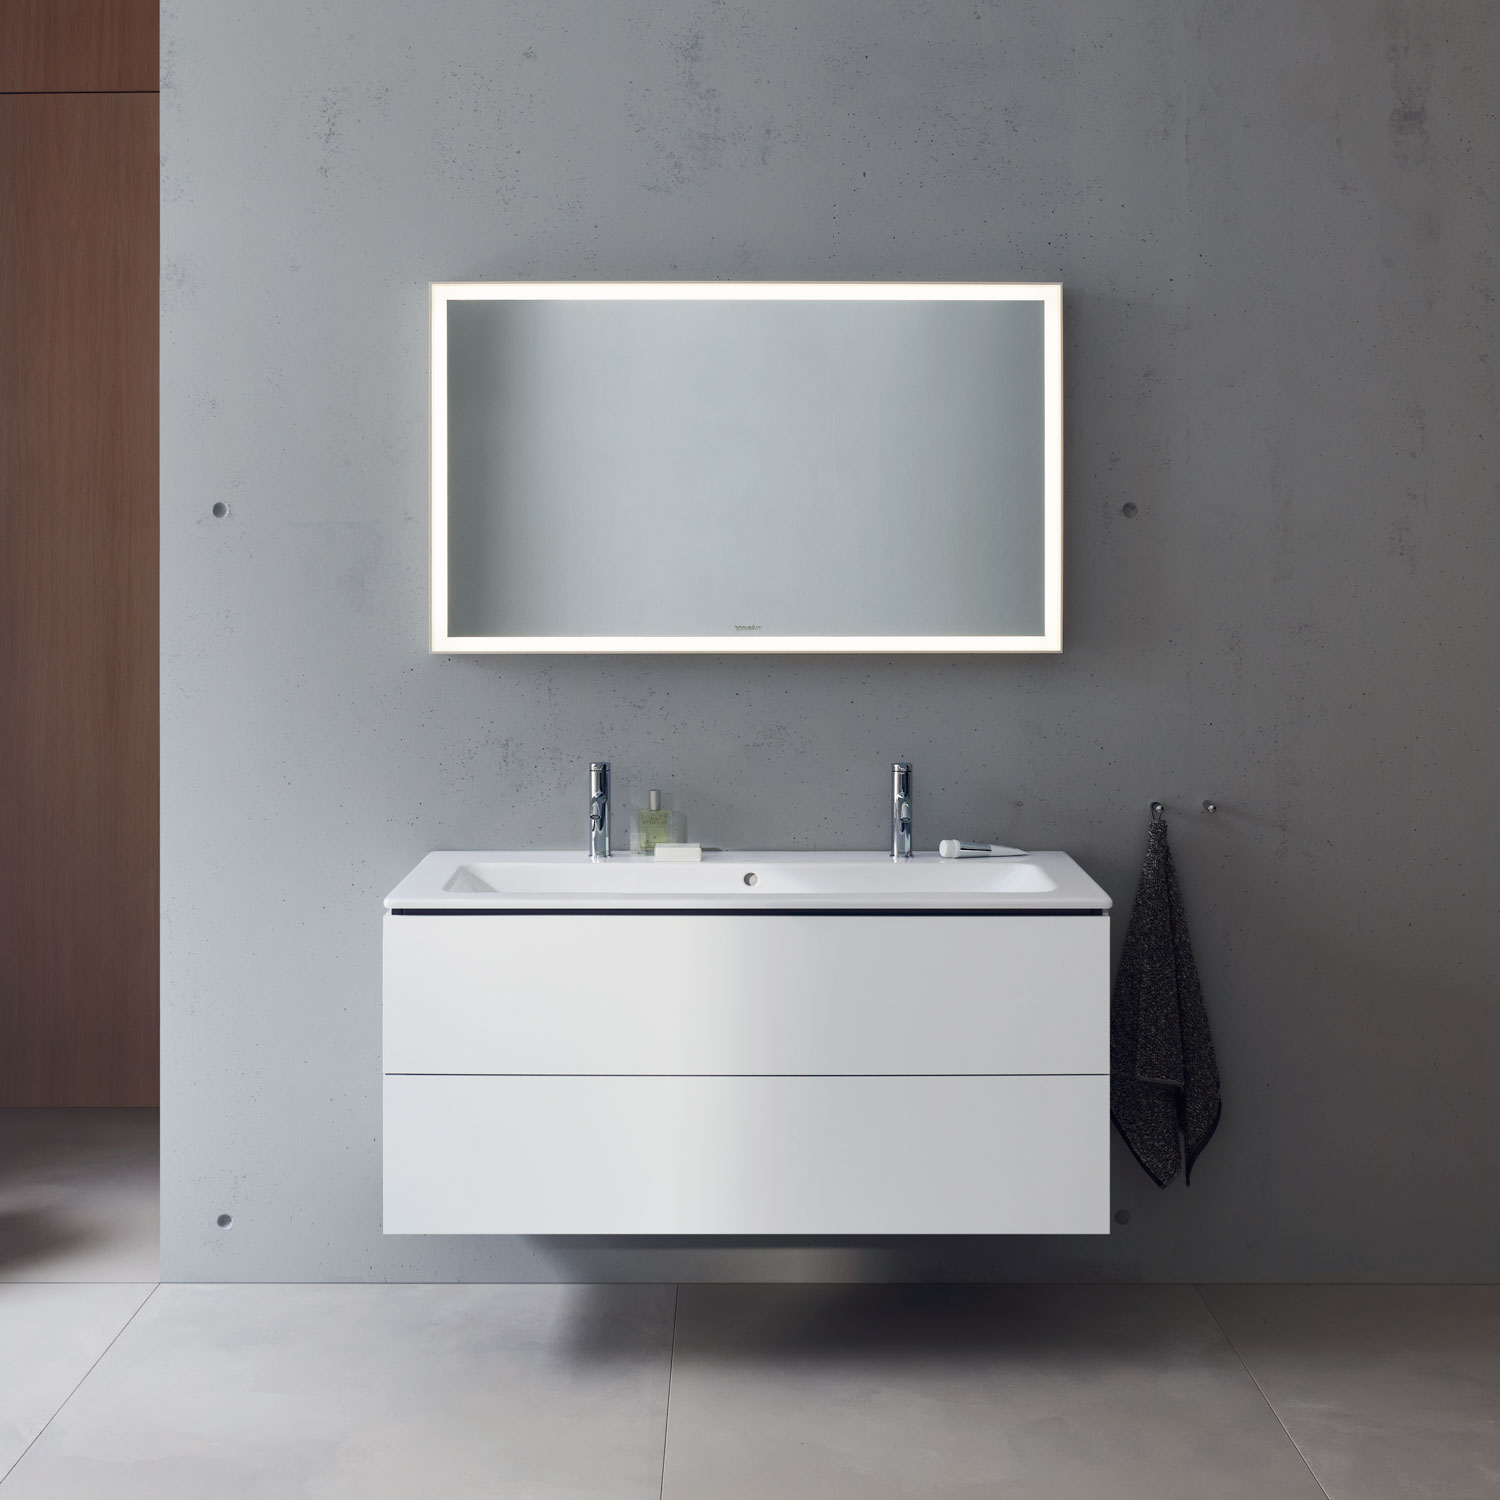 Me by Starck double washbasin with vanity unit
